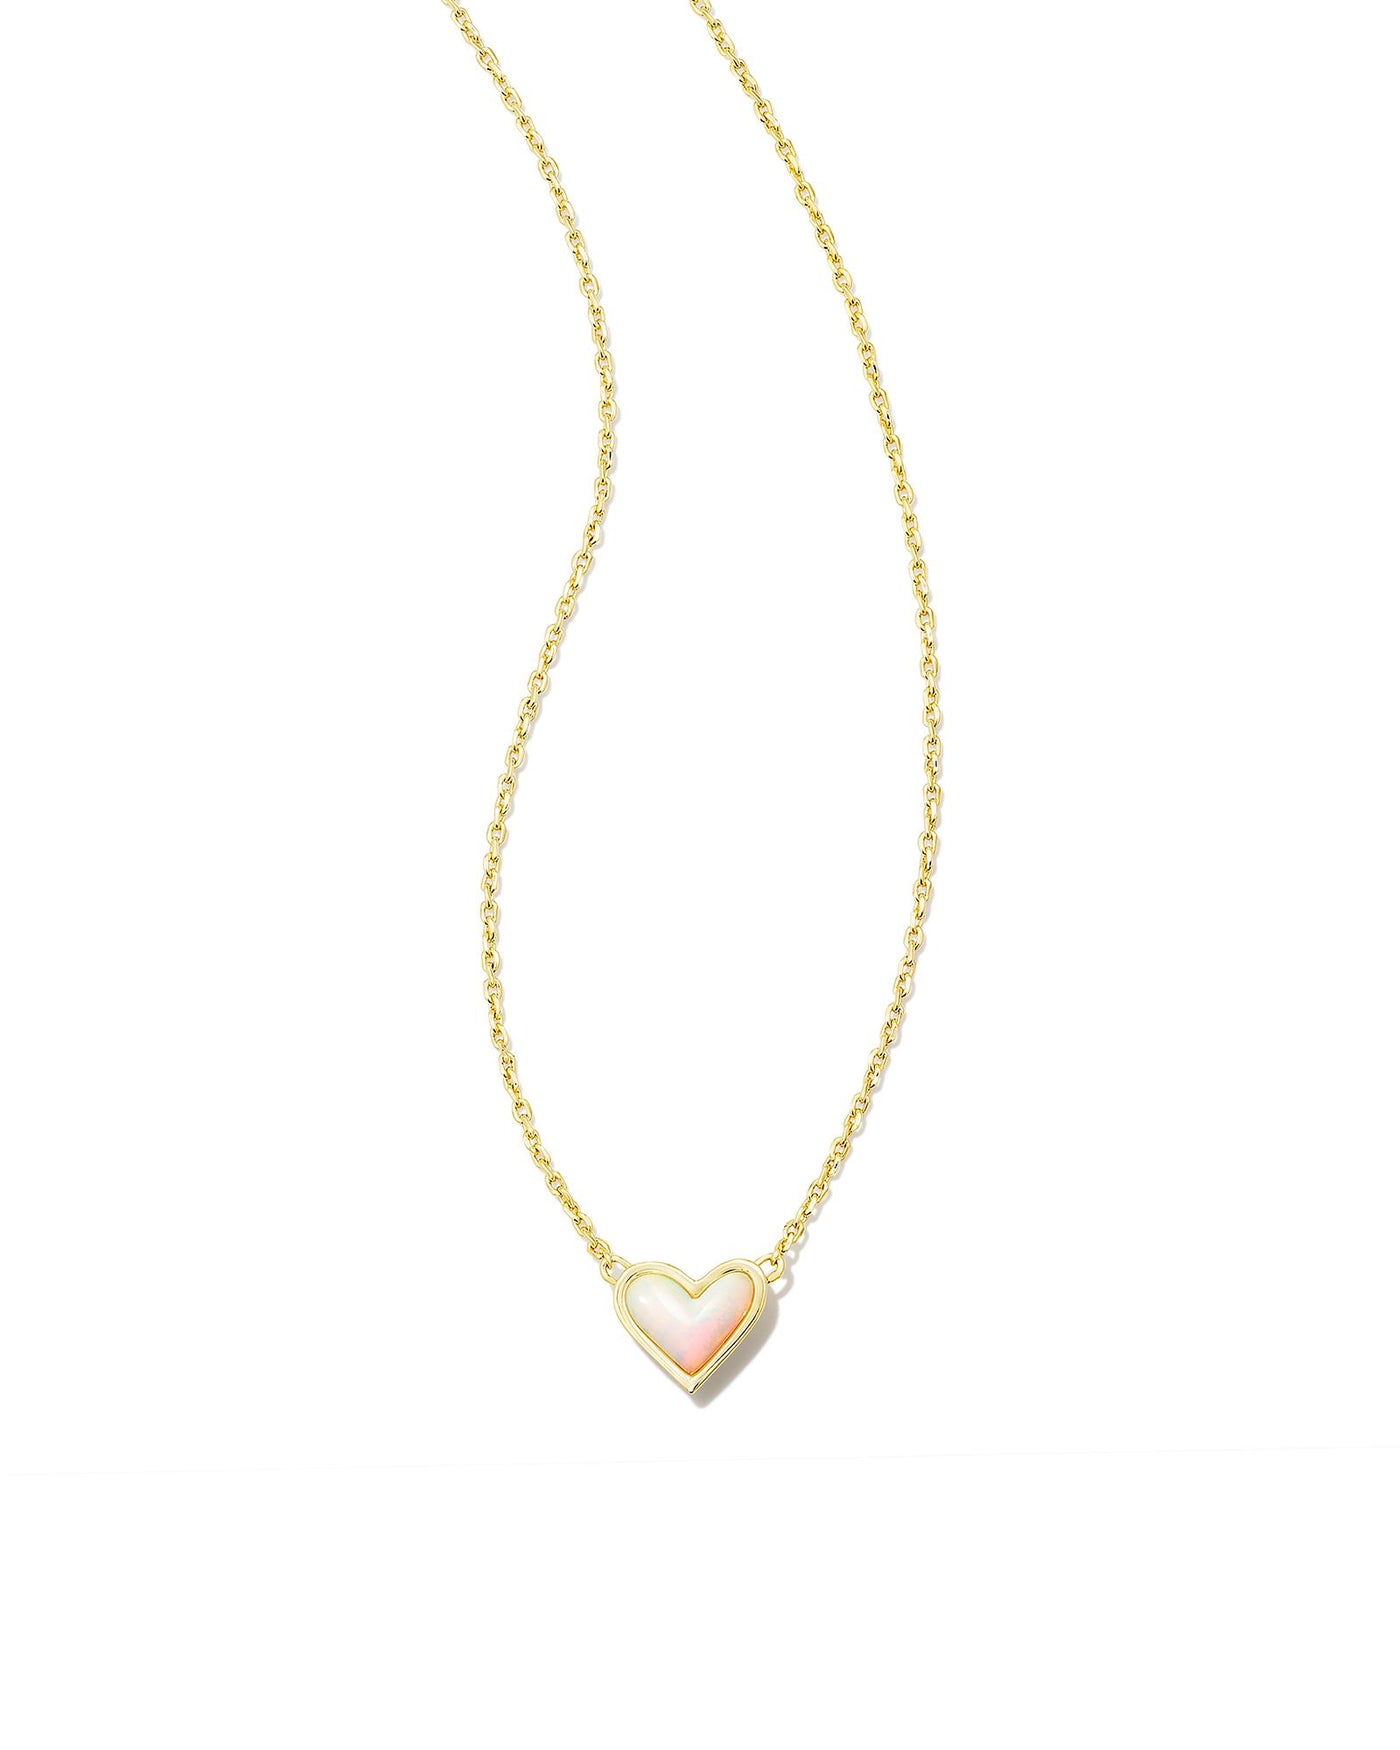 Kendra Scott Framed Ari Heart Short Pendant Necklace-Necklaces-Kendra Scott-Market Street Nest, Fashionable Clothing, Shoes and Home Décor Located in Mabank, TX